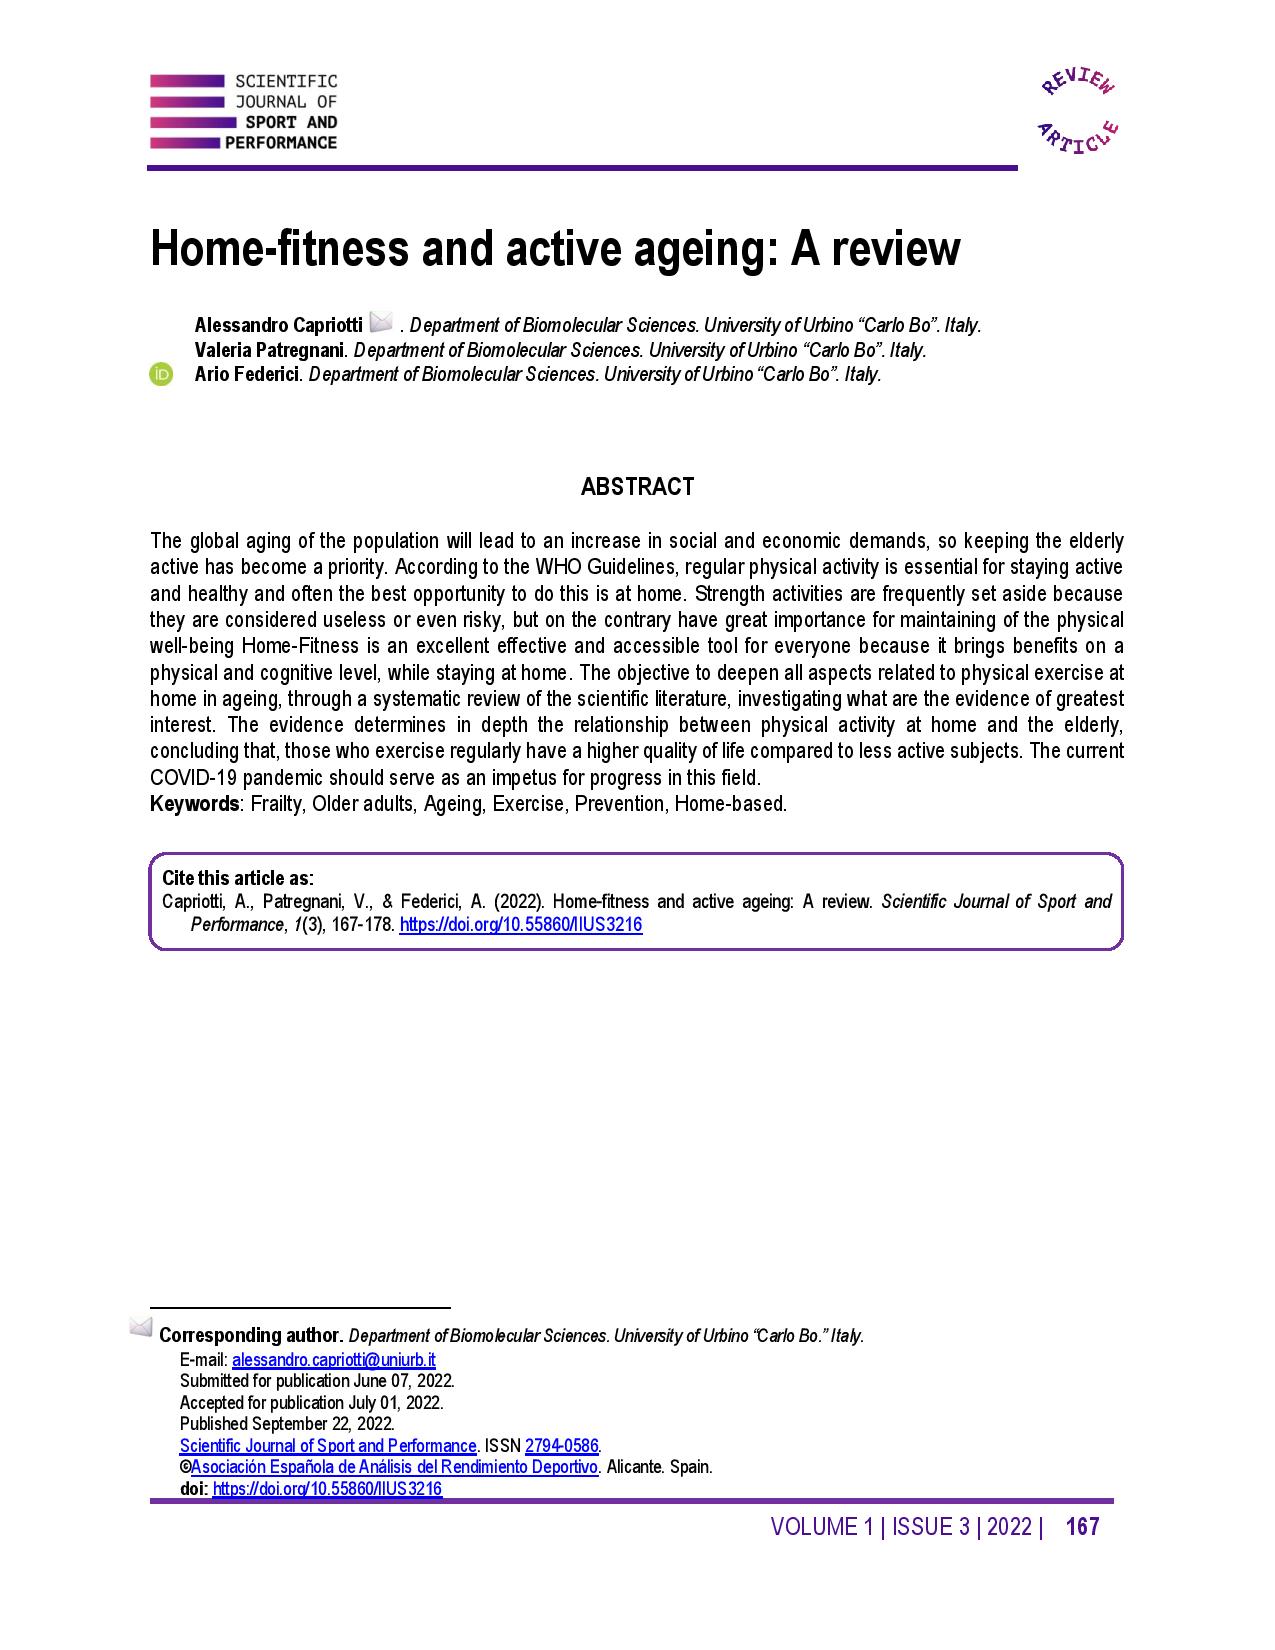 Effect of a home-based exercise program on functional mobility and quality  of life in elderly people: protocol of a single-blind, randomized  controlled trial, Trials